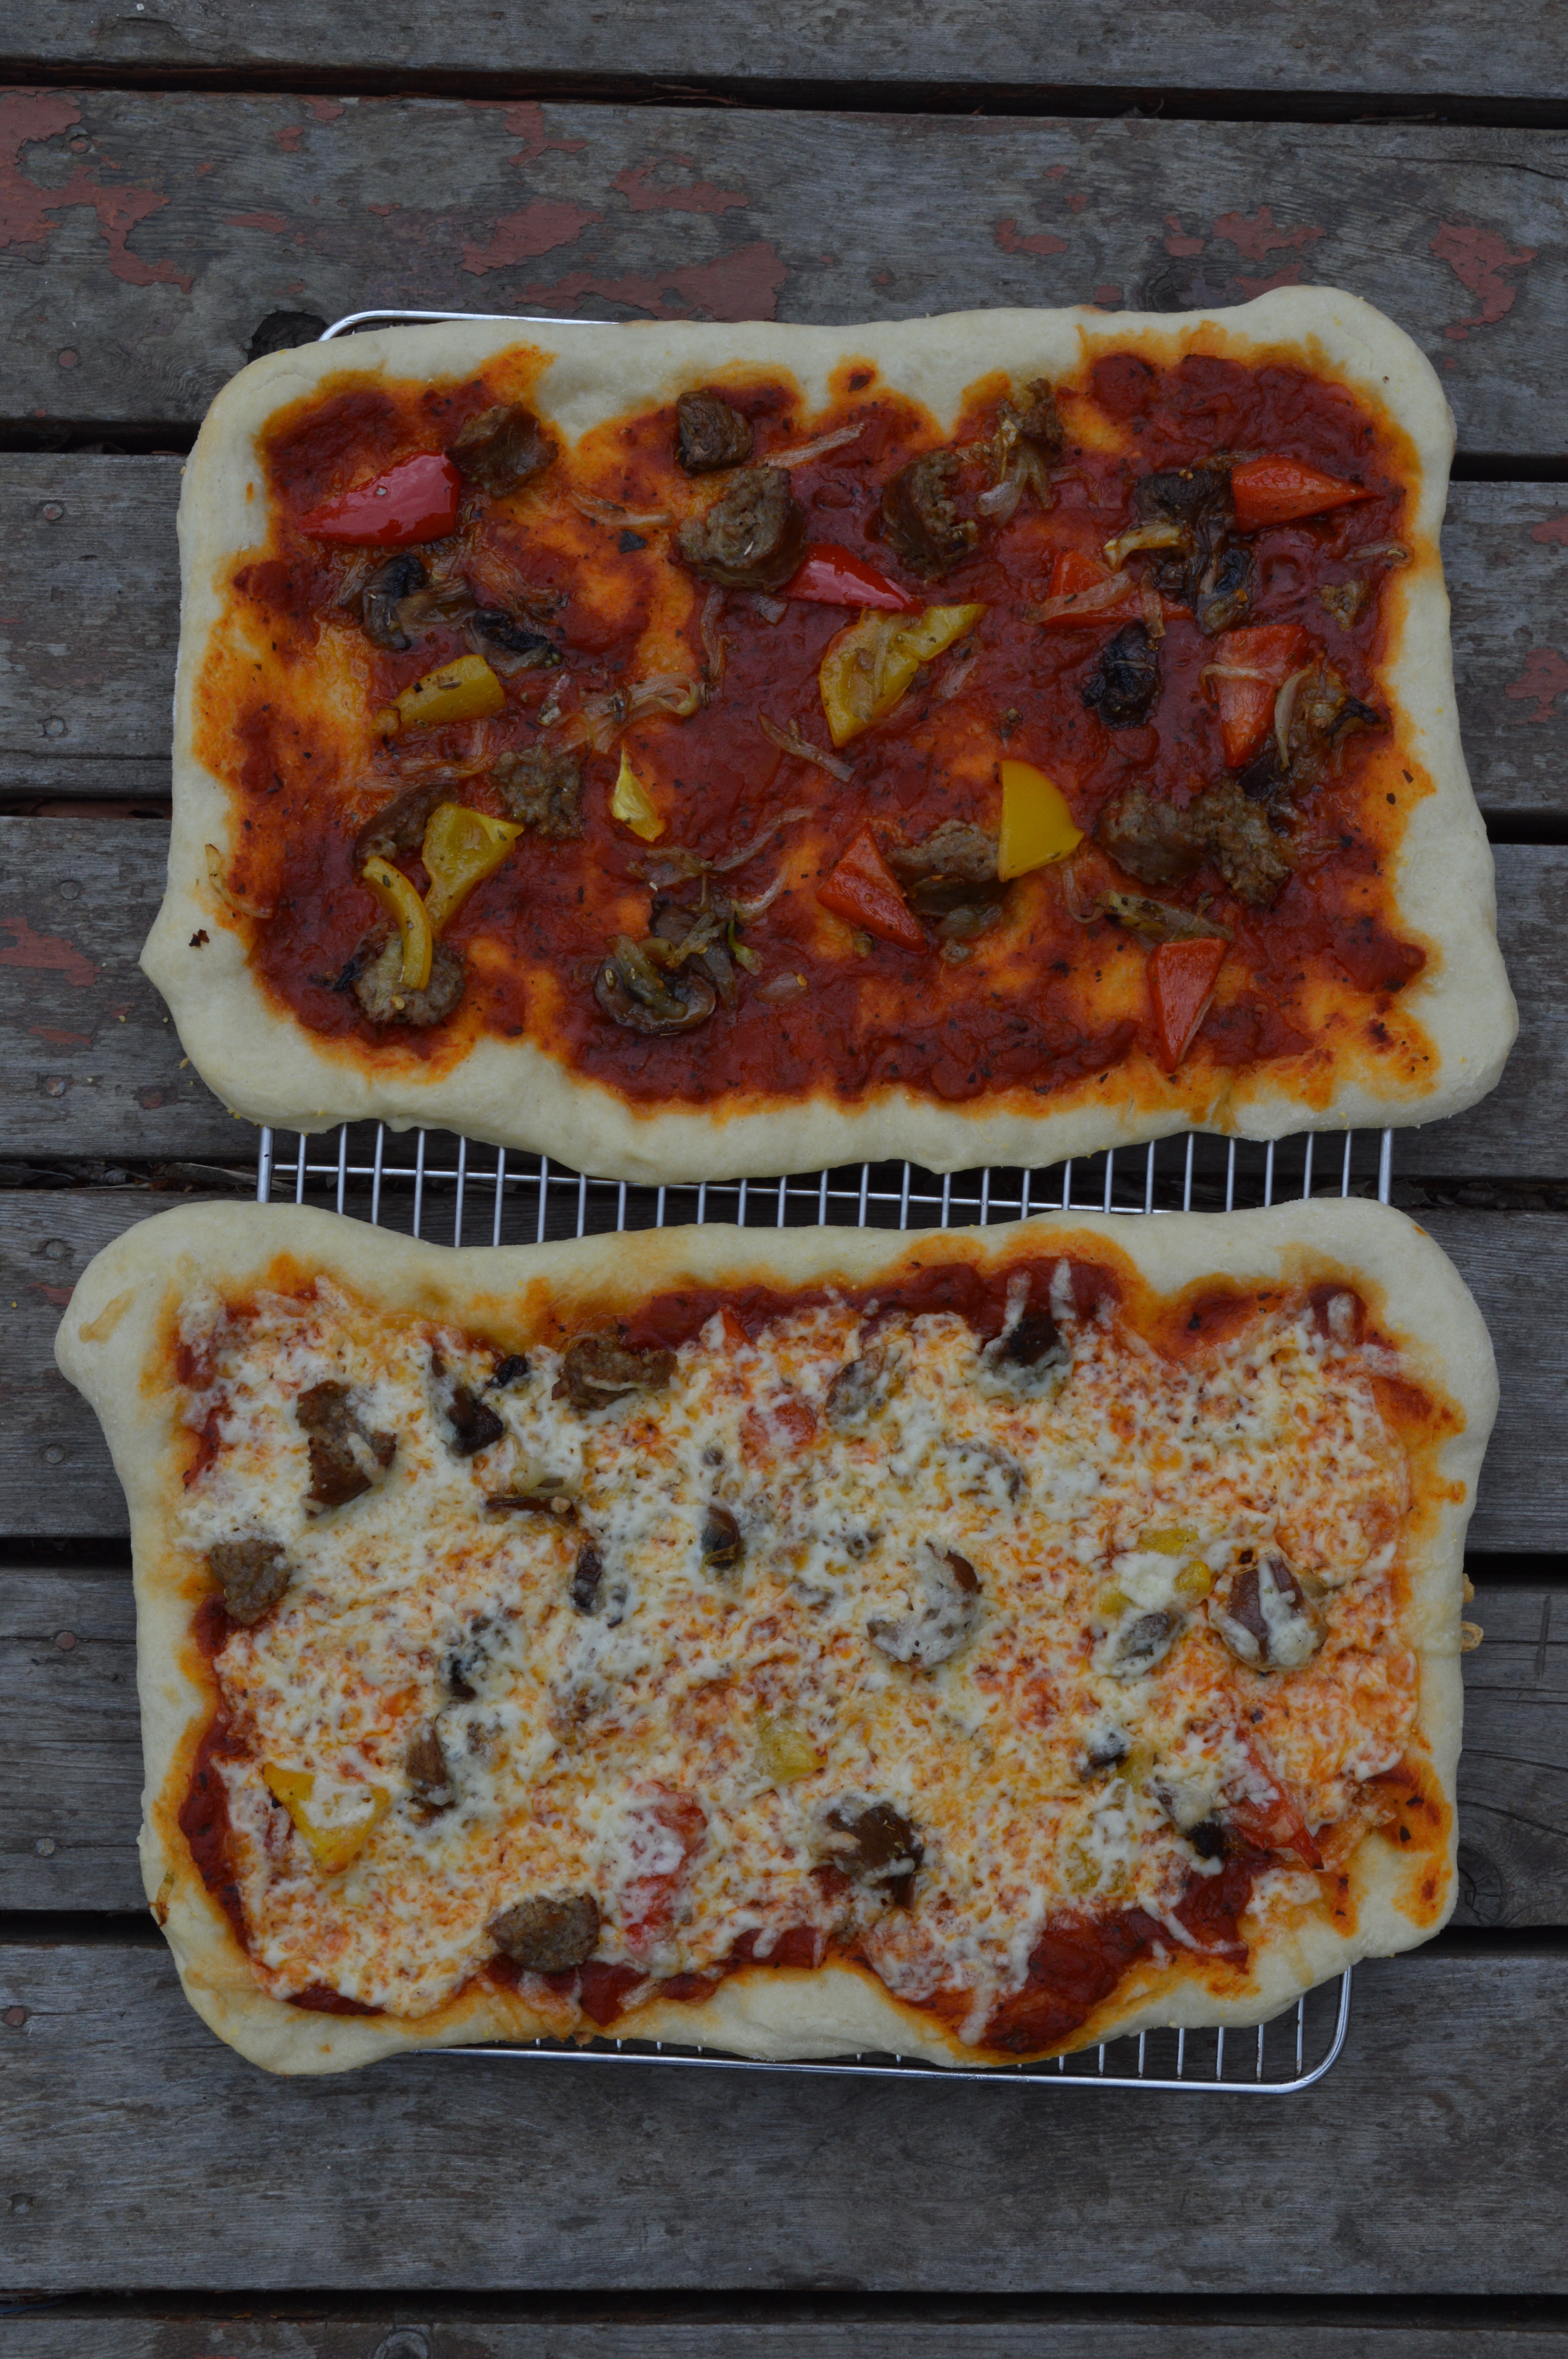 Homemade pizzas with sausage, peppers, and provolone.